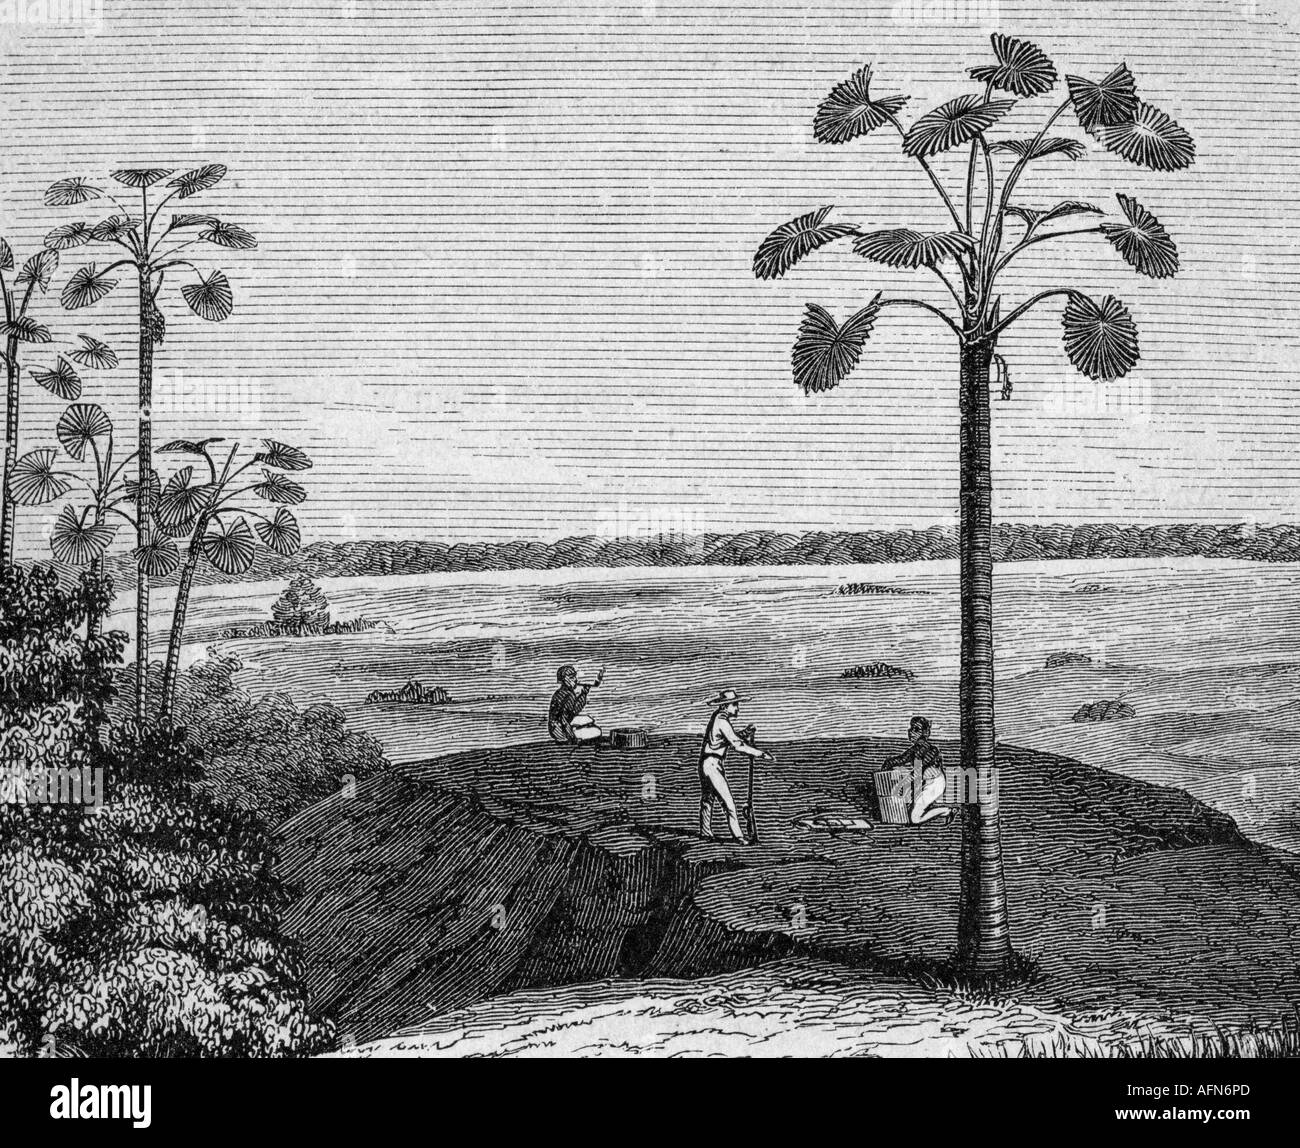 Humboldt, Alexander von, 14.9.1769 - 6.5.1859, German naturalist, American expedition 1799 - 1804, in the Llanos 1800, engraving, 19th century, South America, Venzuela/Columbia, travel, science, , Stock Photo